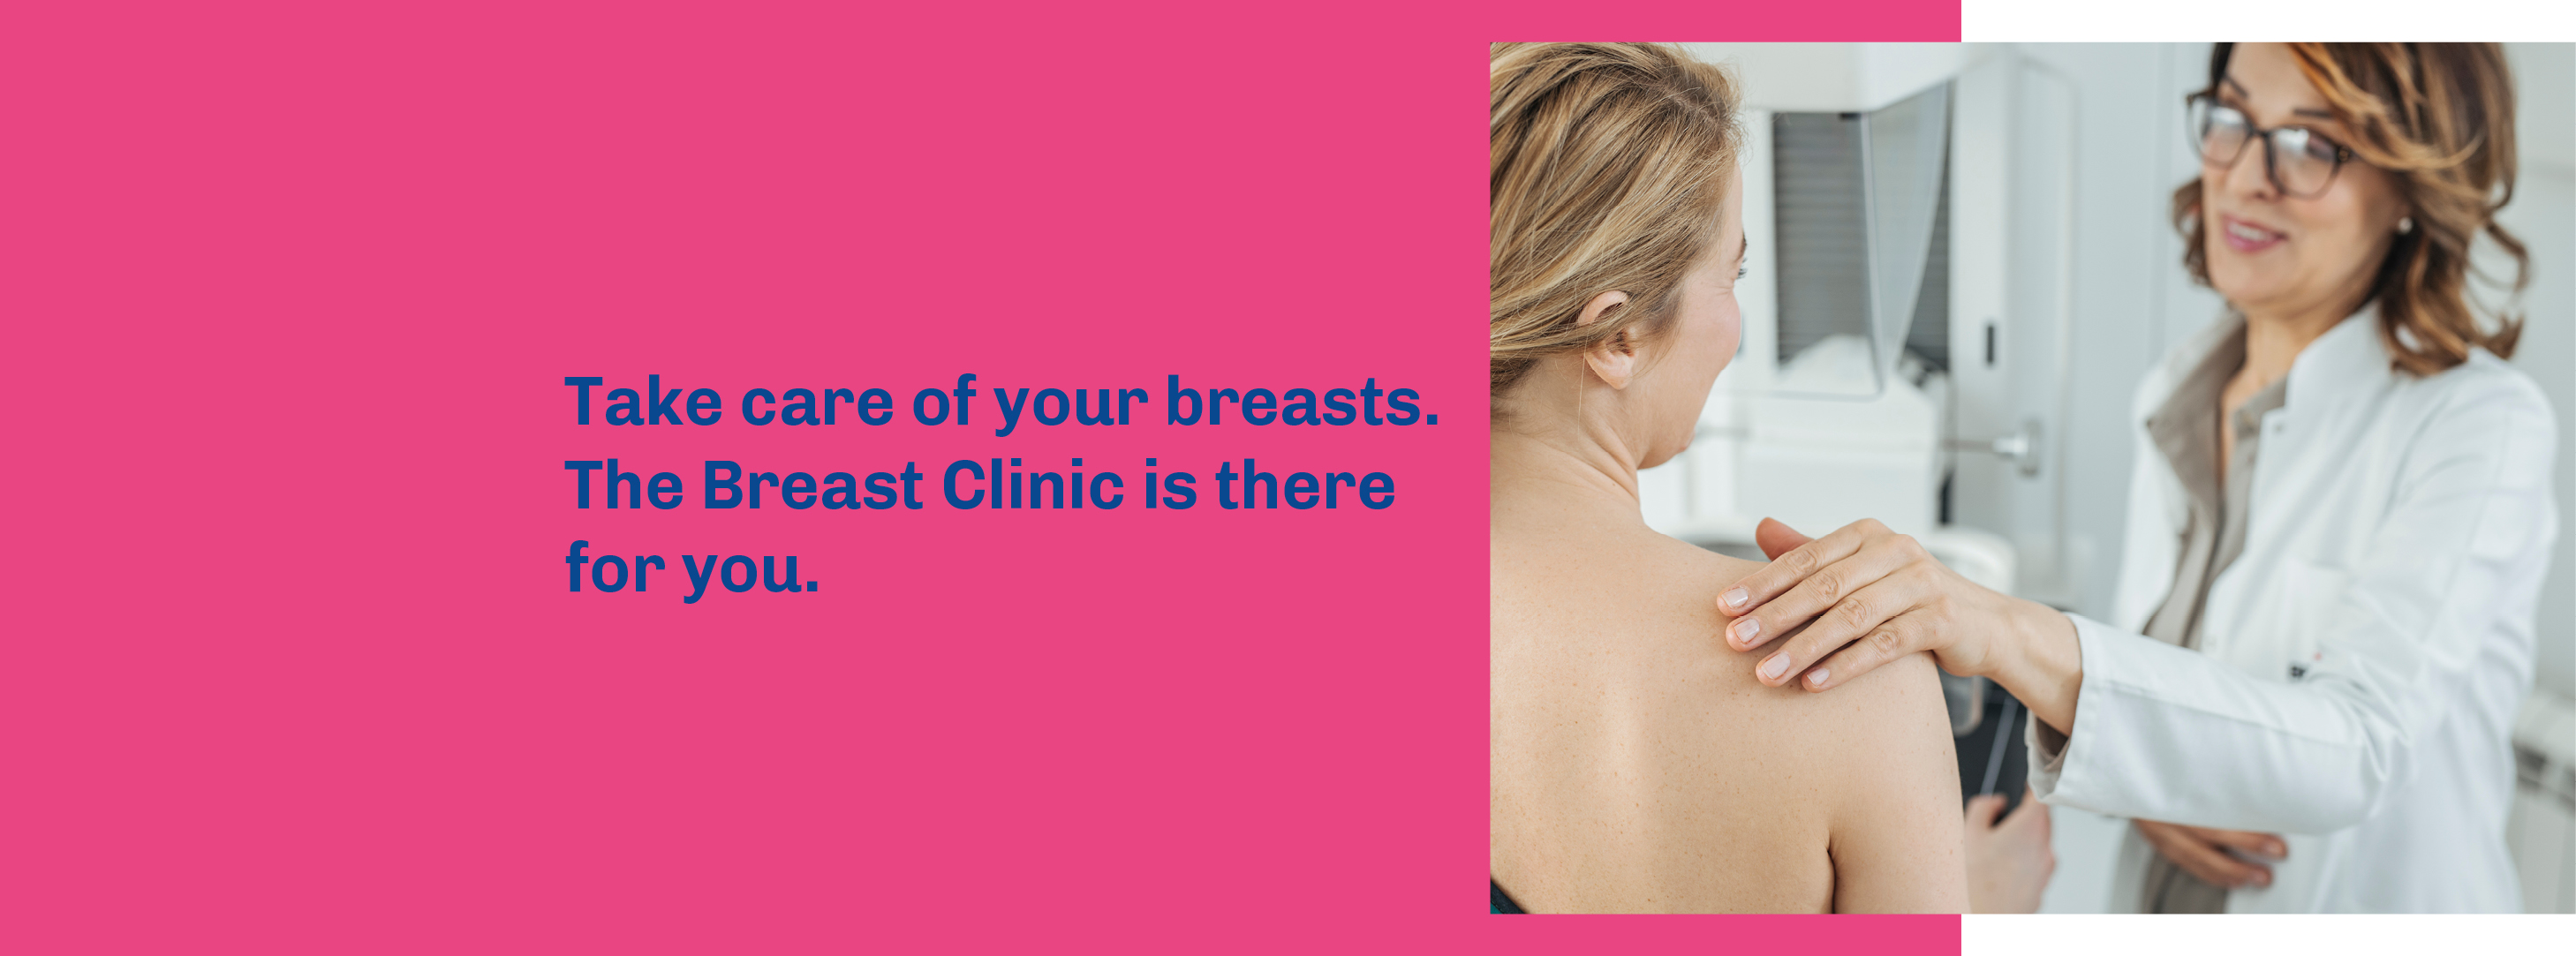 Breast Care Clinic Brussels Breast Cancer